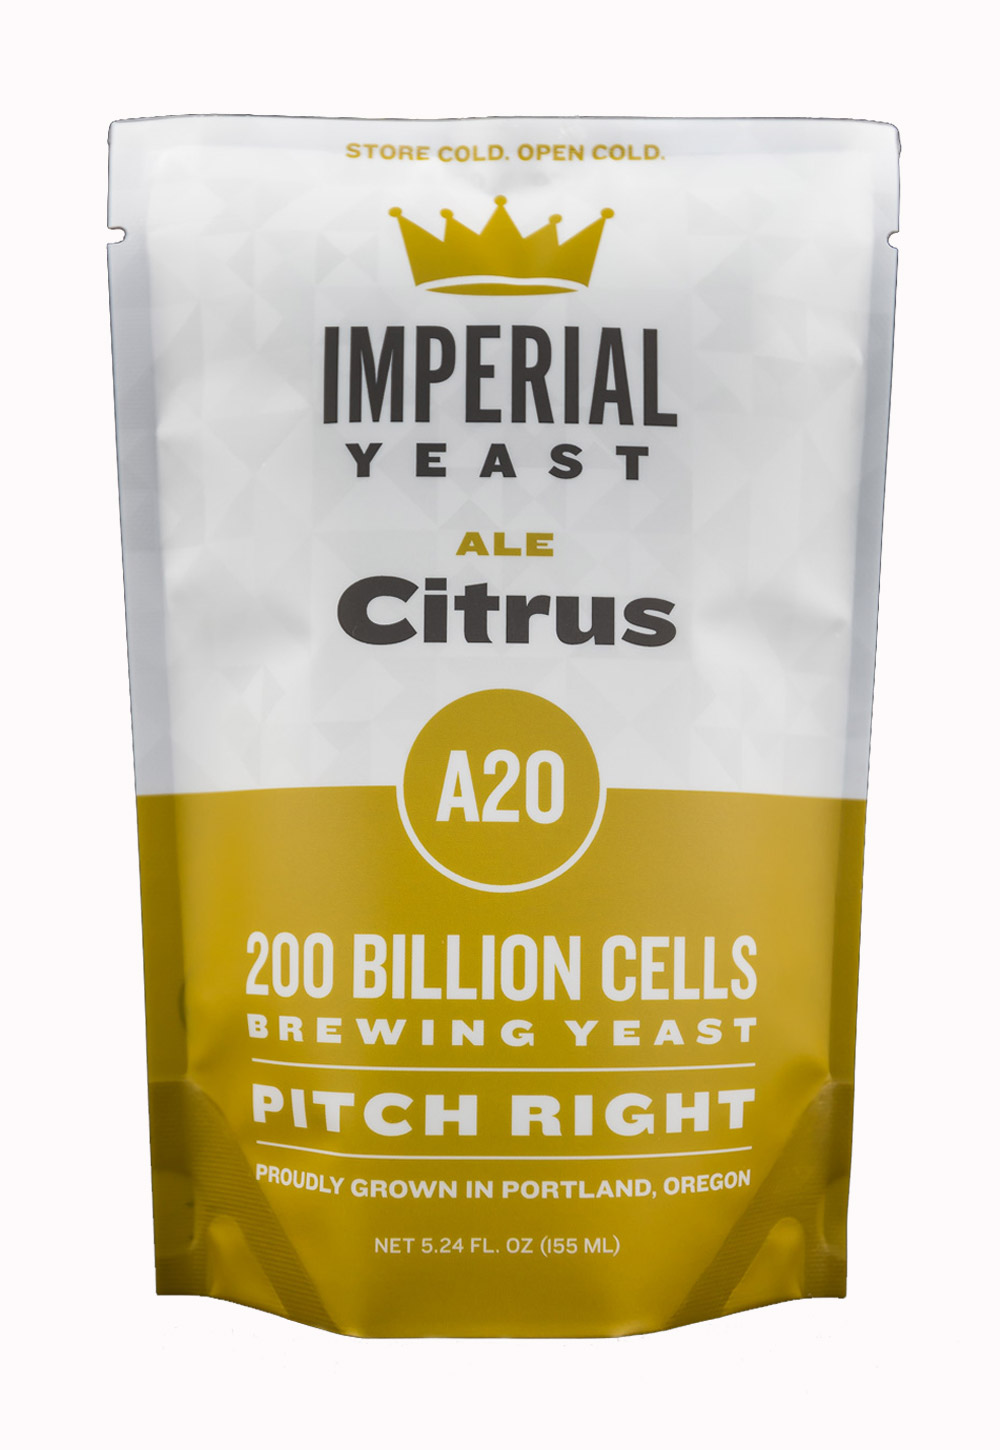 A20 Citrus Wild Saccharomyces Yeast from Imperial Yeast